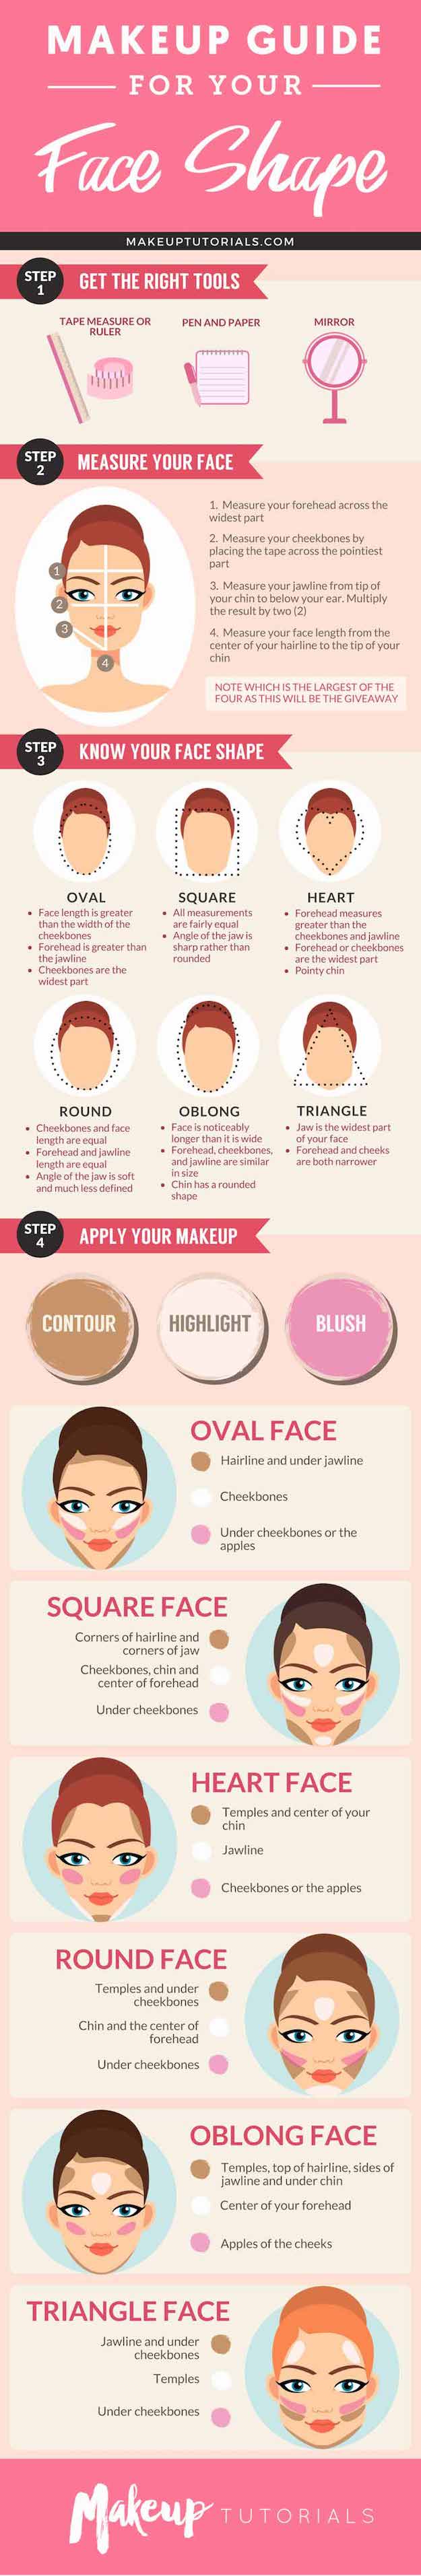 What's Your Face Shape? | Makeup Guide